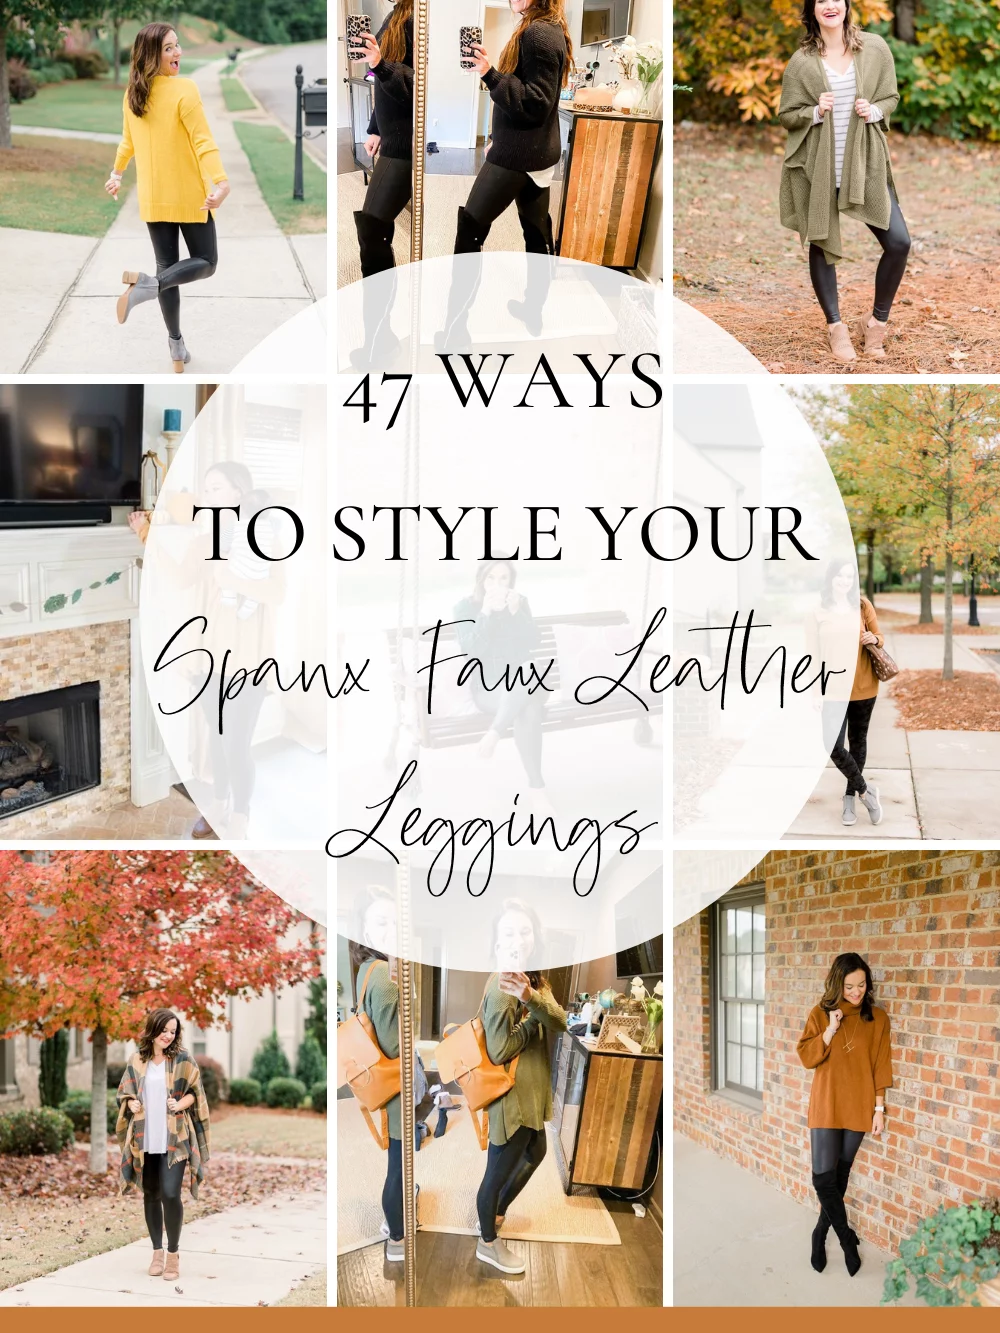 How To Style Spanx Faux Leather Leggings: 10 Cute Outfit Ideas From Amazon by Alabama mommy + fashion blogger, Heather Brown // My Life Well Loved